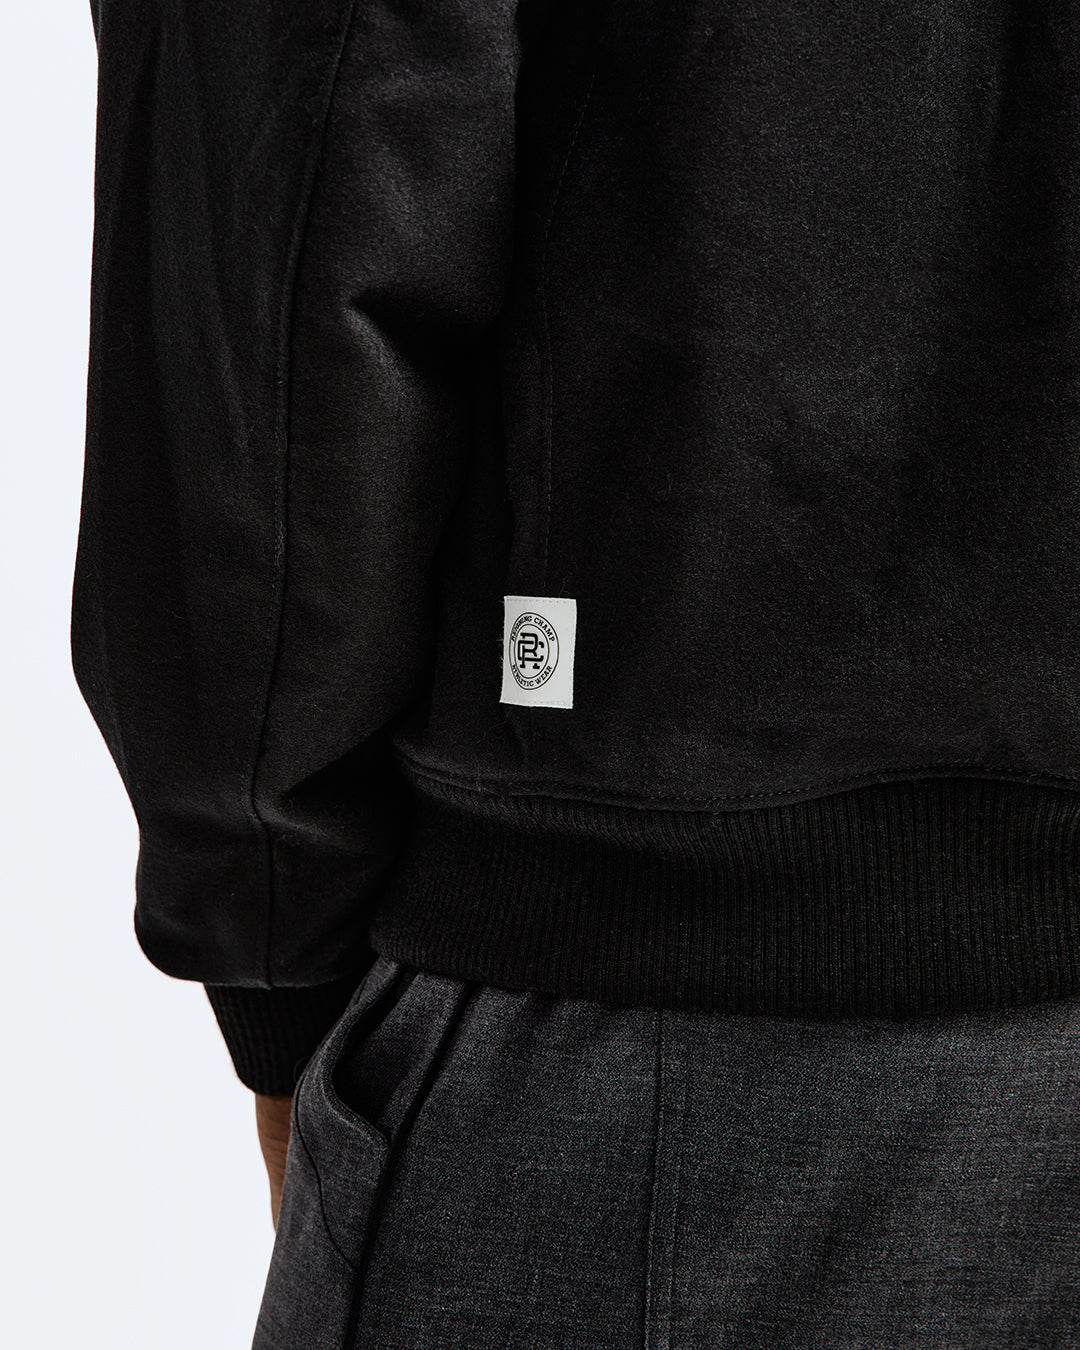 Wool Flannel JV Jacket | Reigning Champ